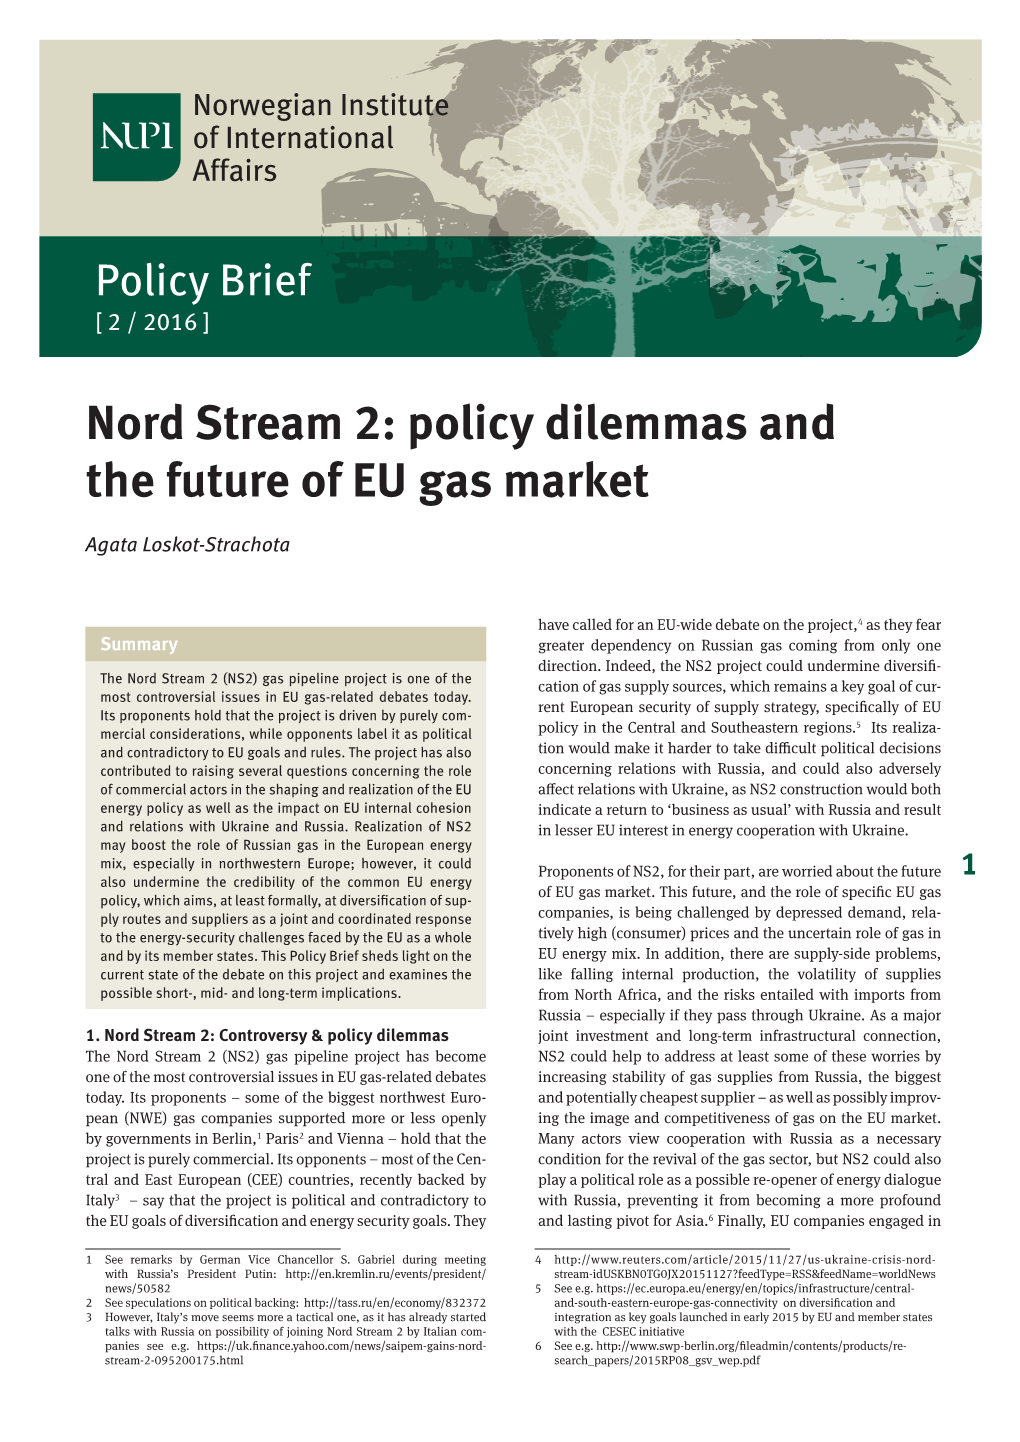 Nord Stream 2: Policy Dilemmas and the Future of EU Gas Market